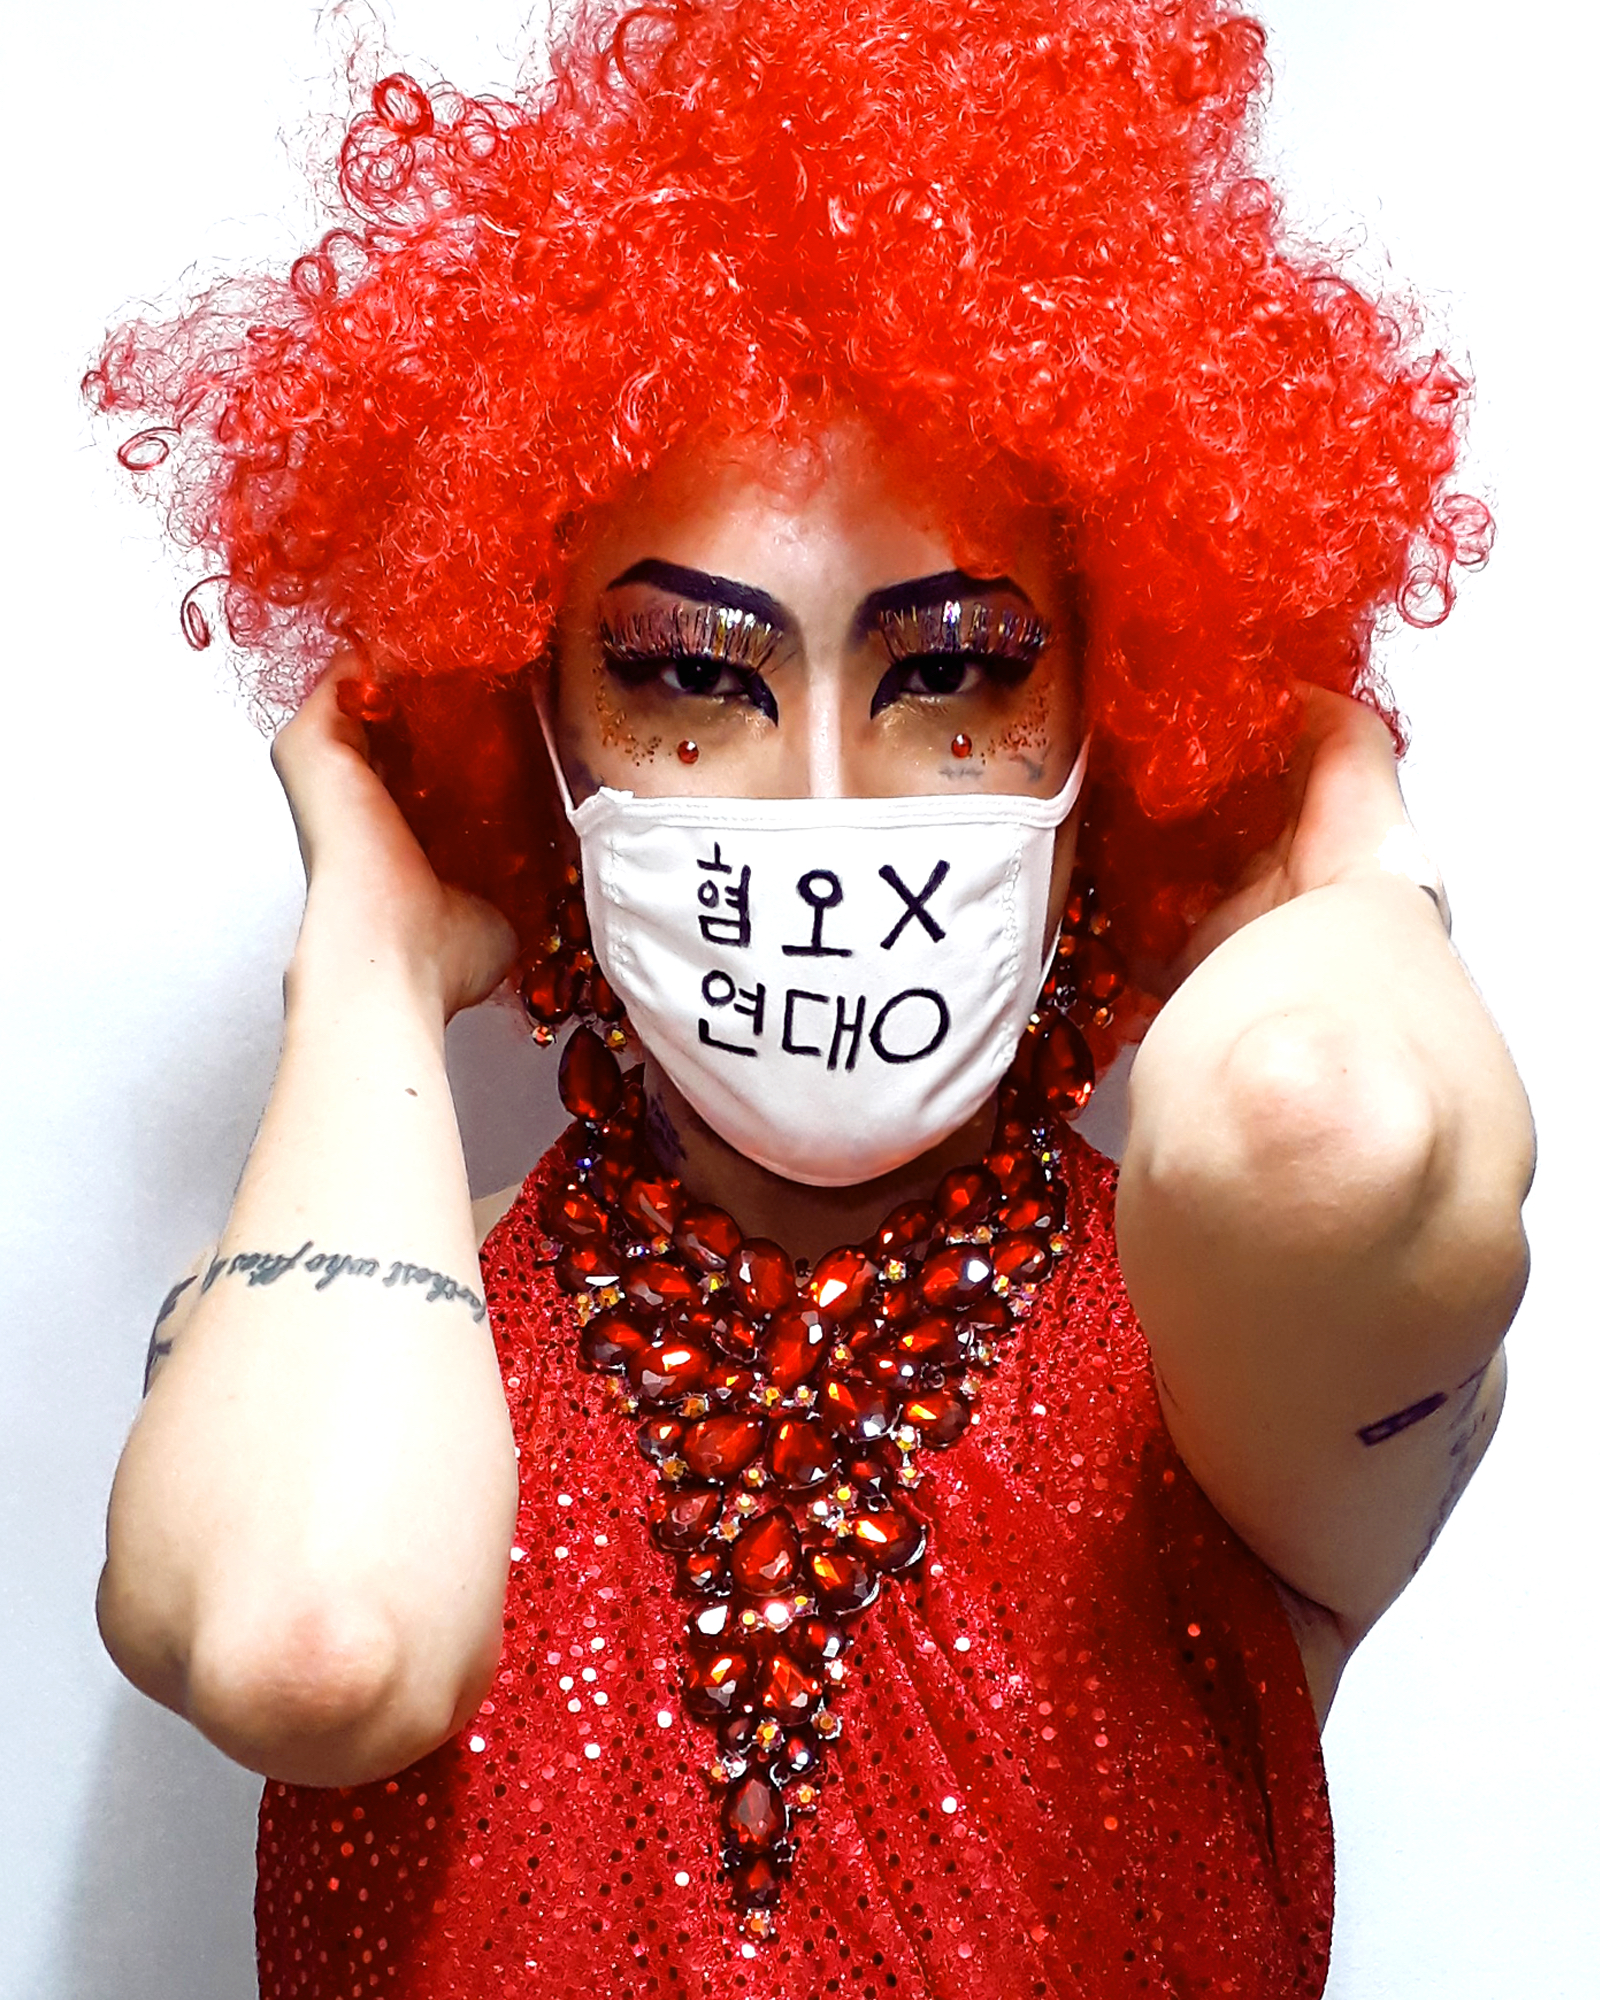 Artist and drag performer Heezy Yang poses in a photo he posted to social media following the Itaewon coronavirus outbreak. The message on his mask translates roughly: "No Hate, Yes Solidarity." (Courtesy Heezy Yang)